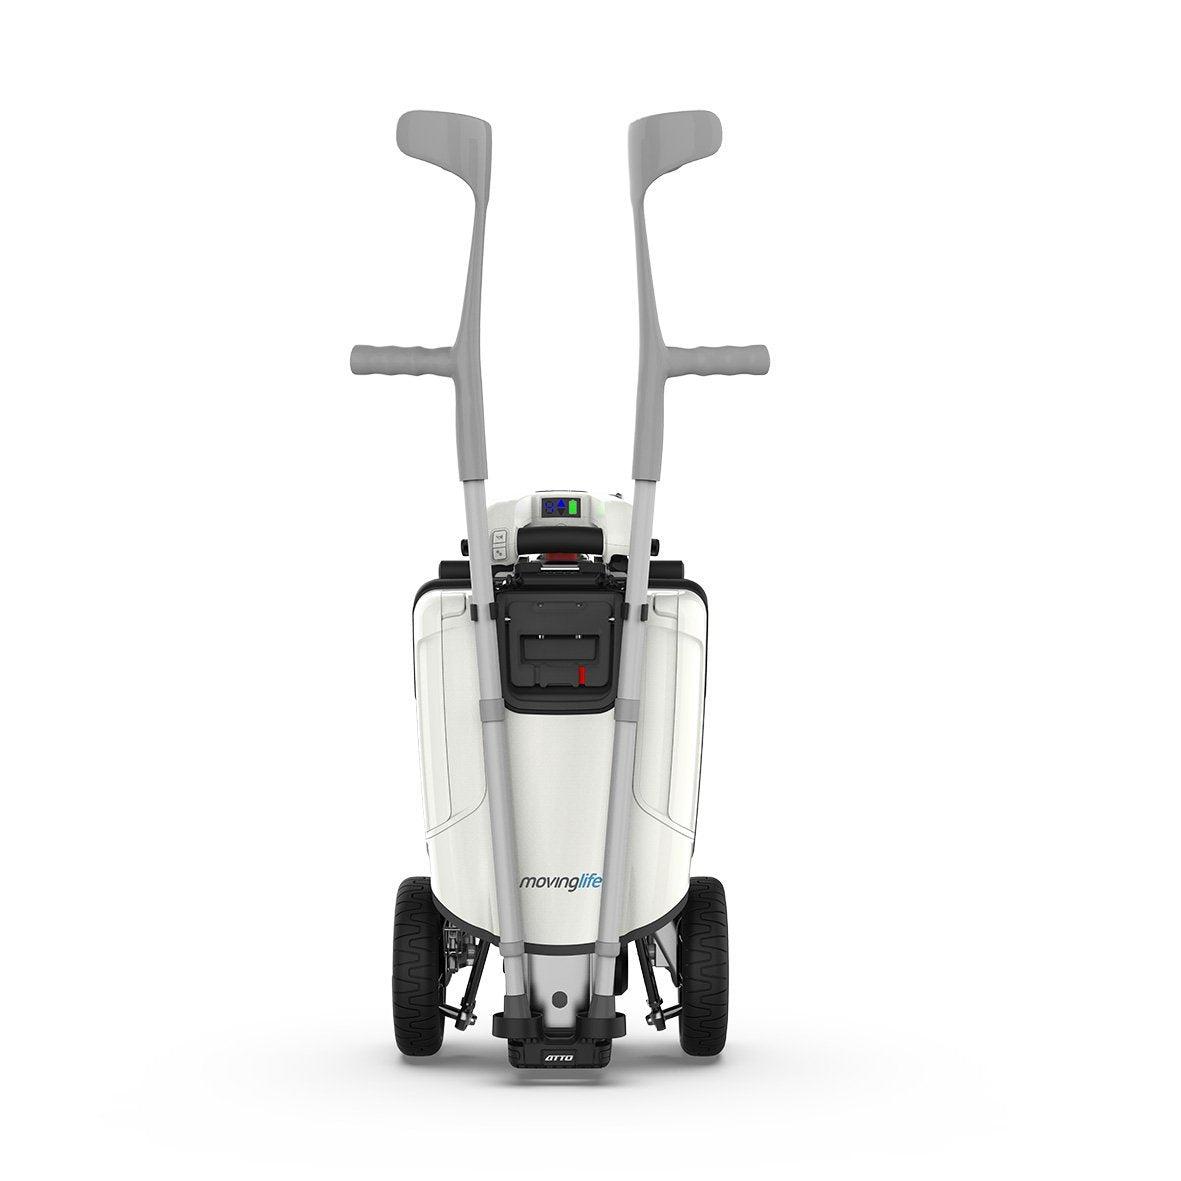 ATTO Uk cane crutches on an closed ATTO mobility scooter